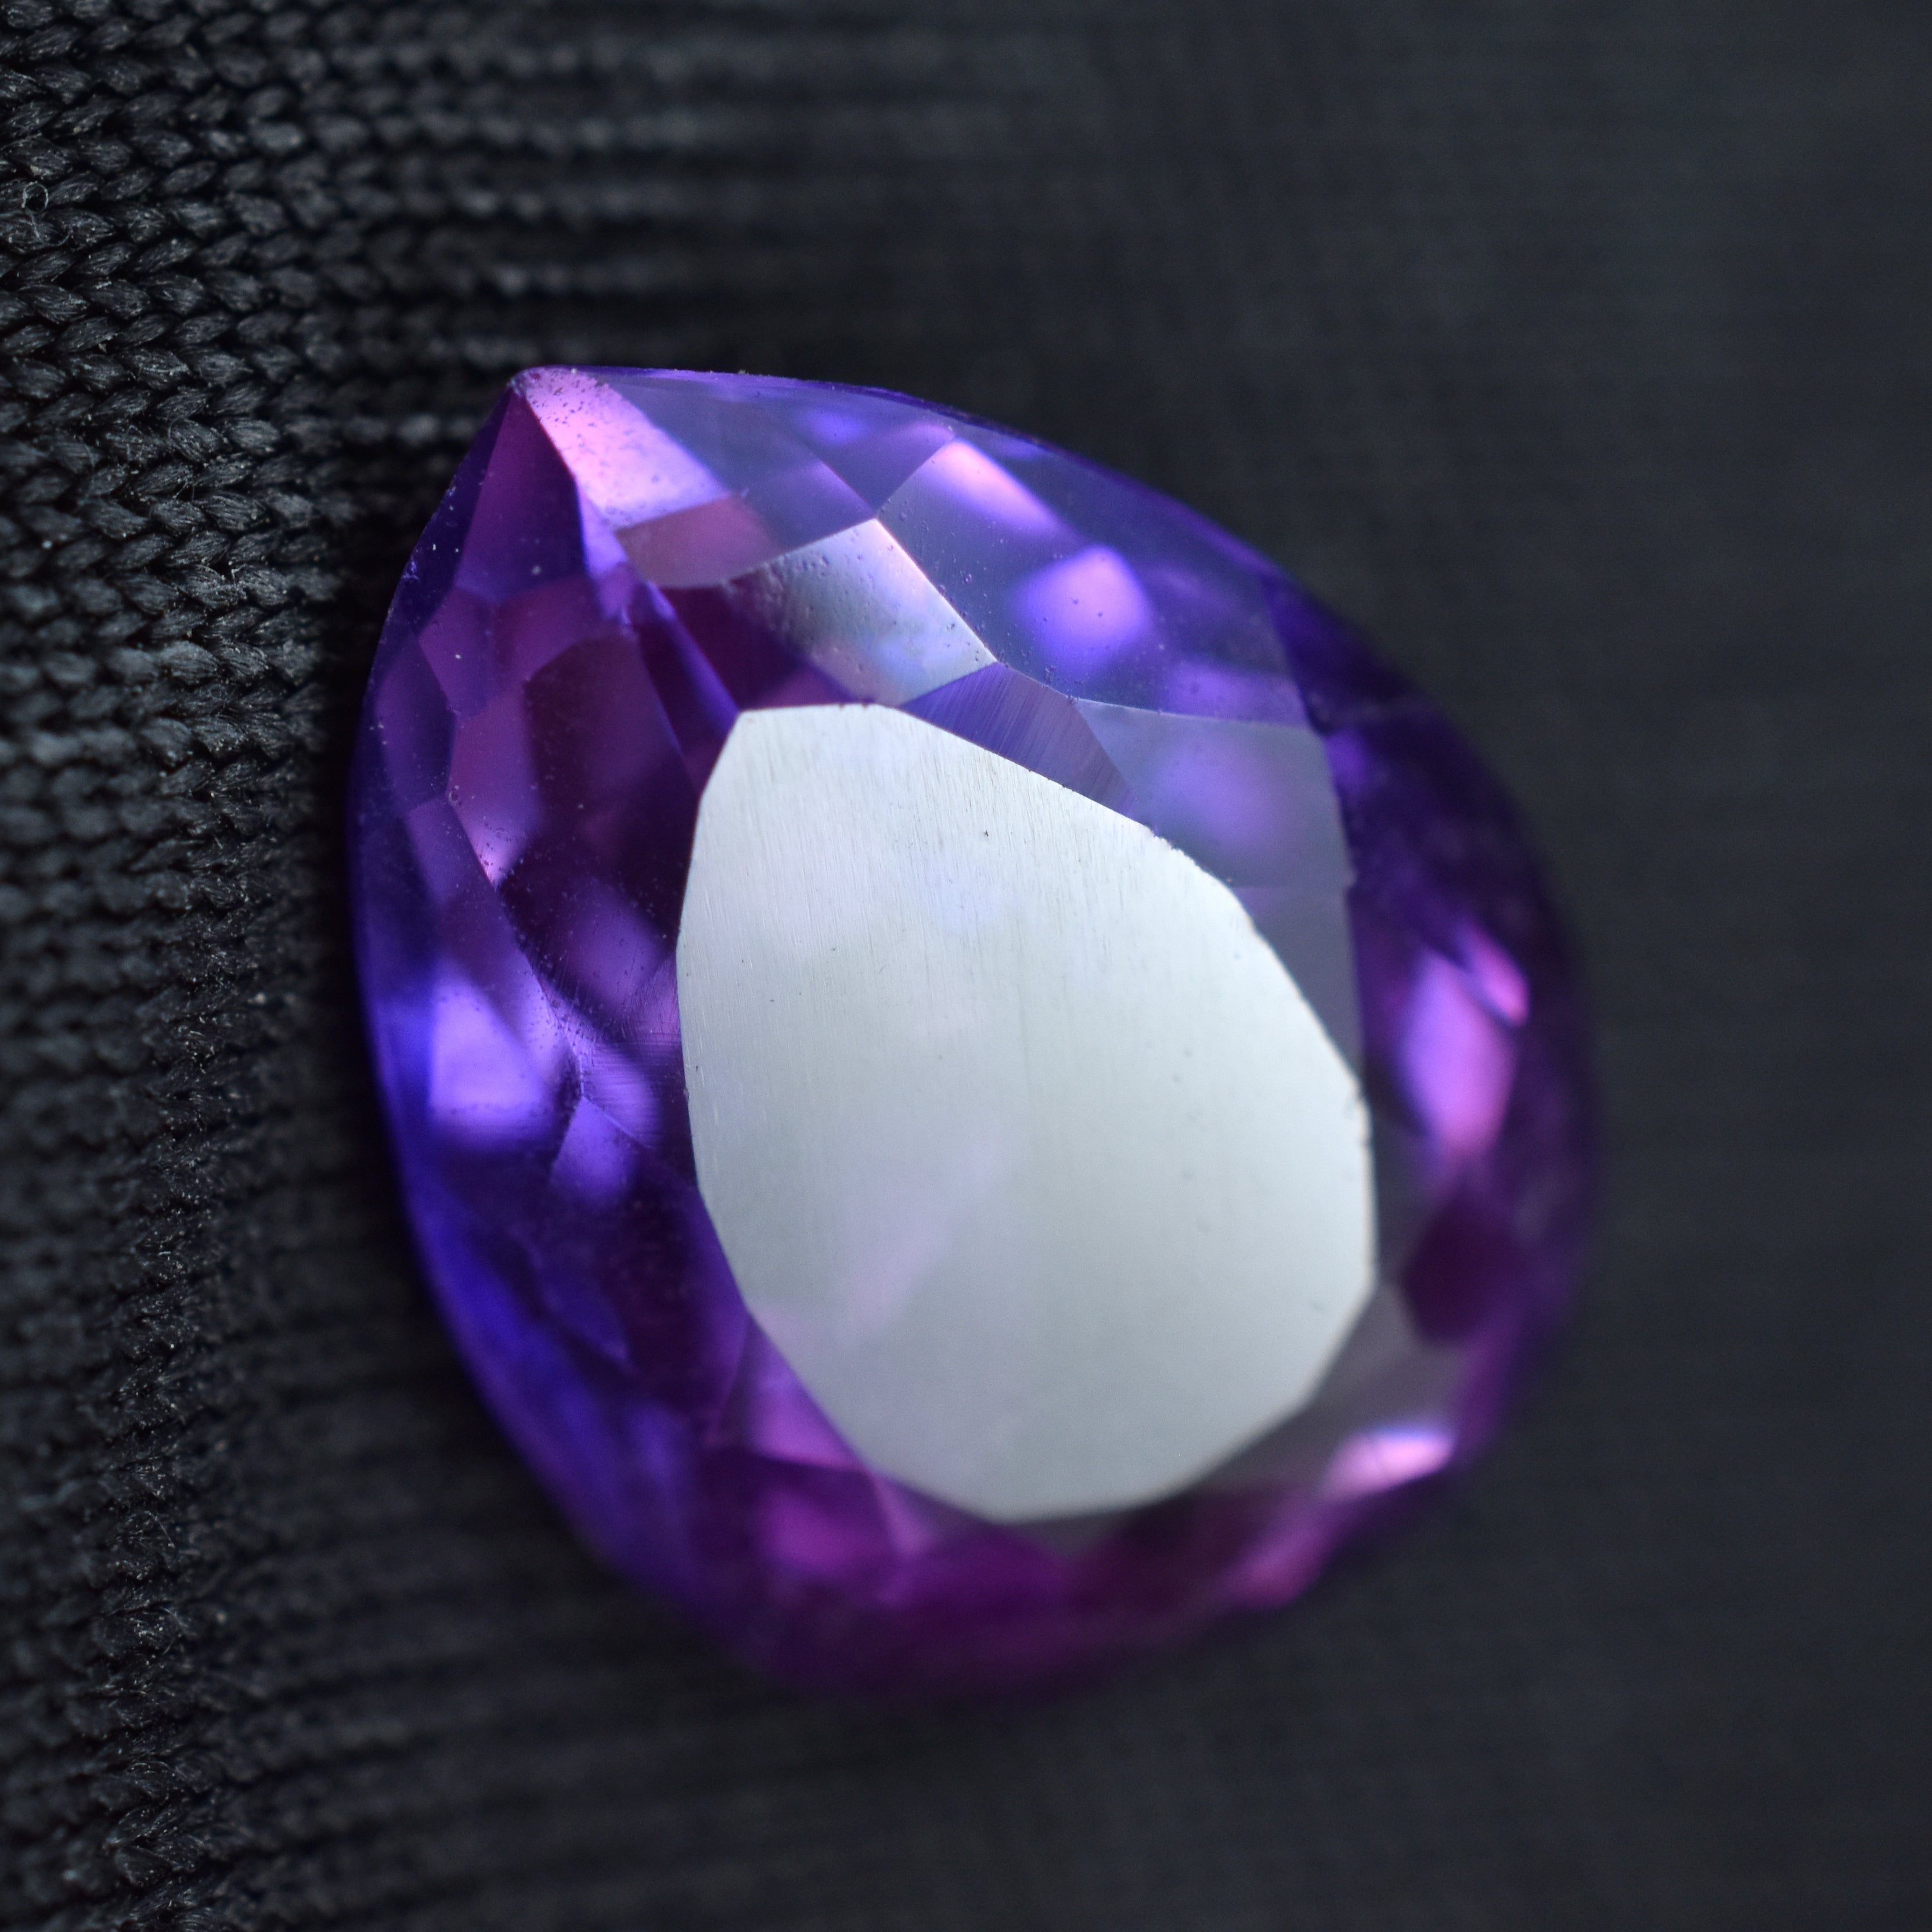 Natural Extremely Rare Purple Sapphire Gem 10.32 Carat CERTIFIED Pear Cut Color Change Sapphire Loose Gemstone | FREE Delivery FREE Gift | Biggest Offer